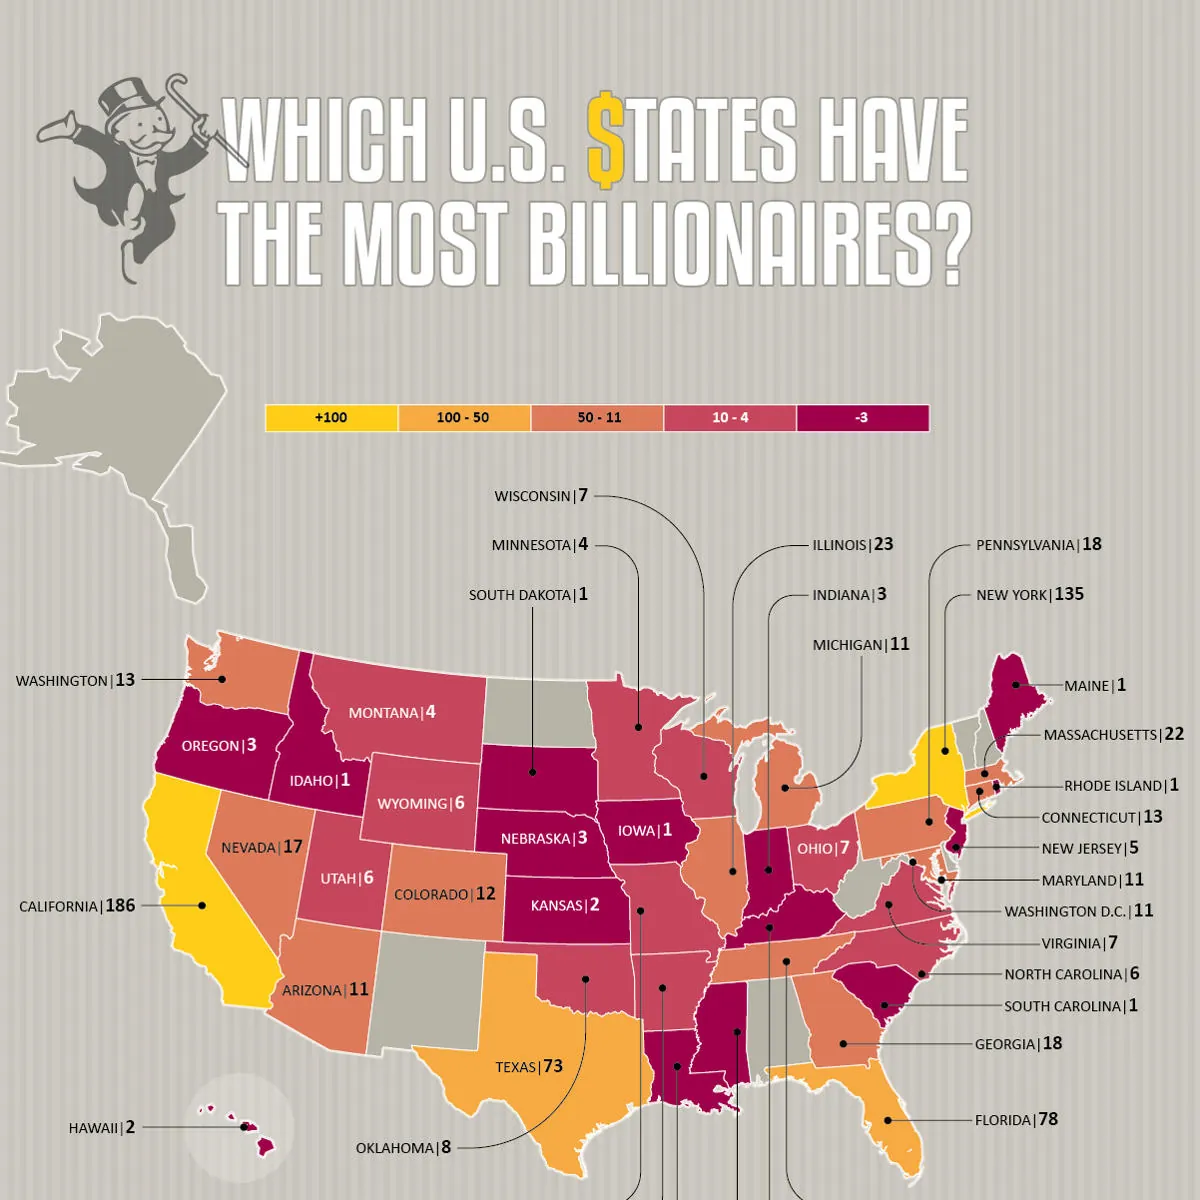 Which U.S. States Have the Most Billionaires?